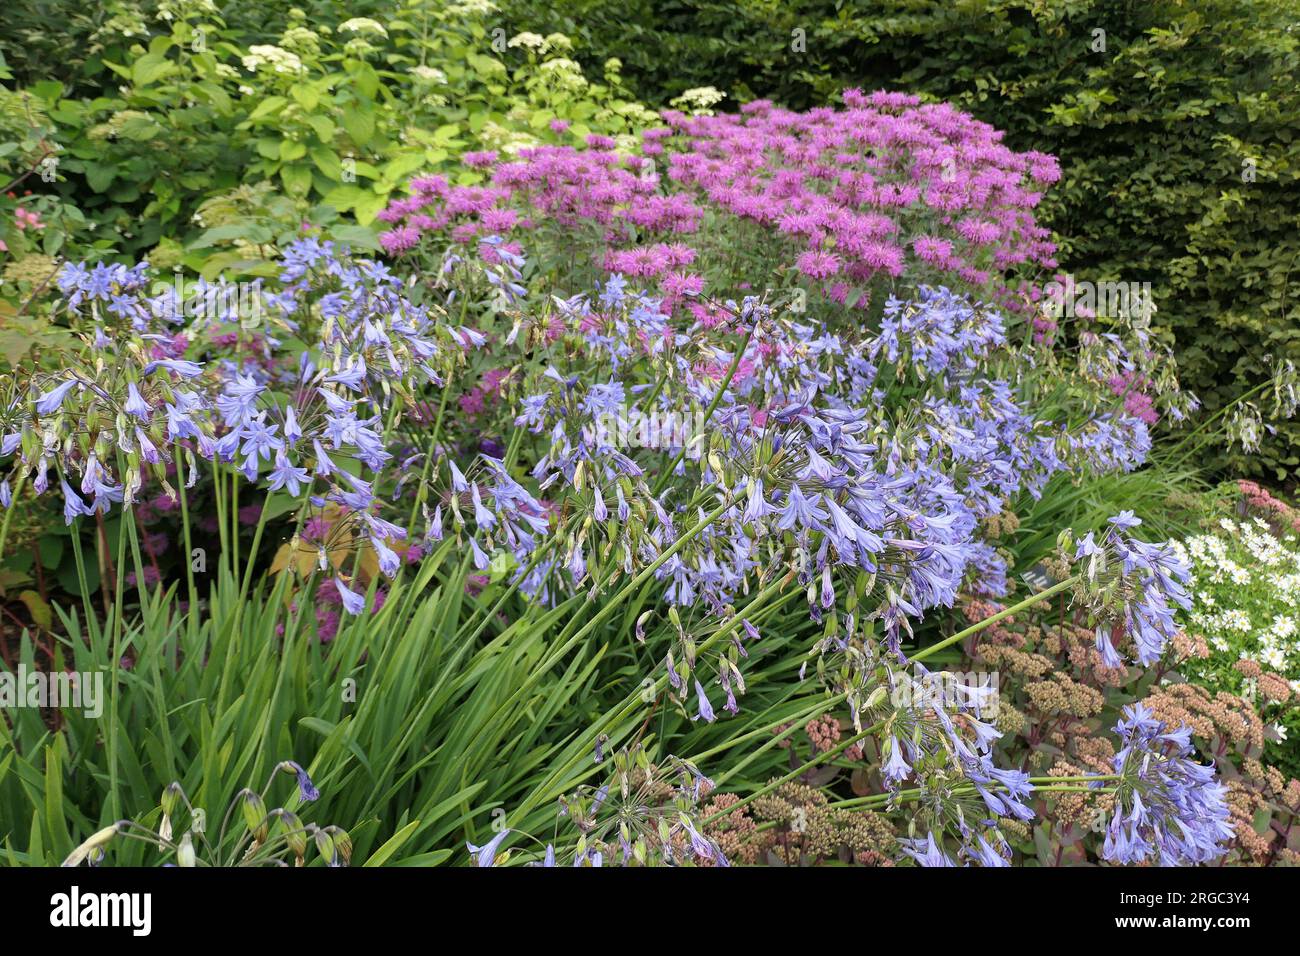 Closeup of the summer flowering herbaceous perennial garden plant Agapanthus Rosemary or African lily seen in the garden border. Stock Photo